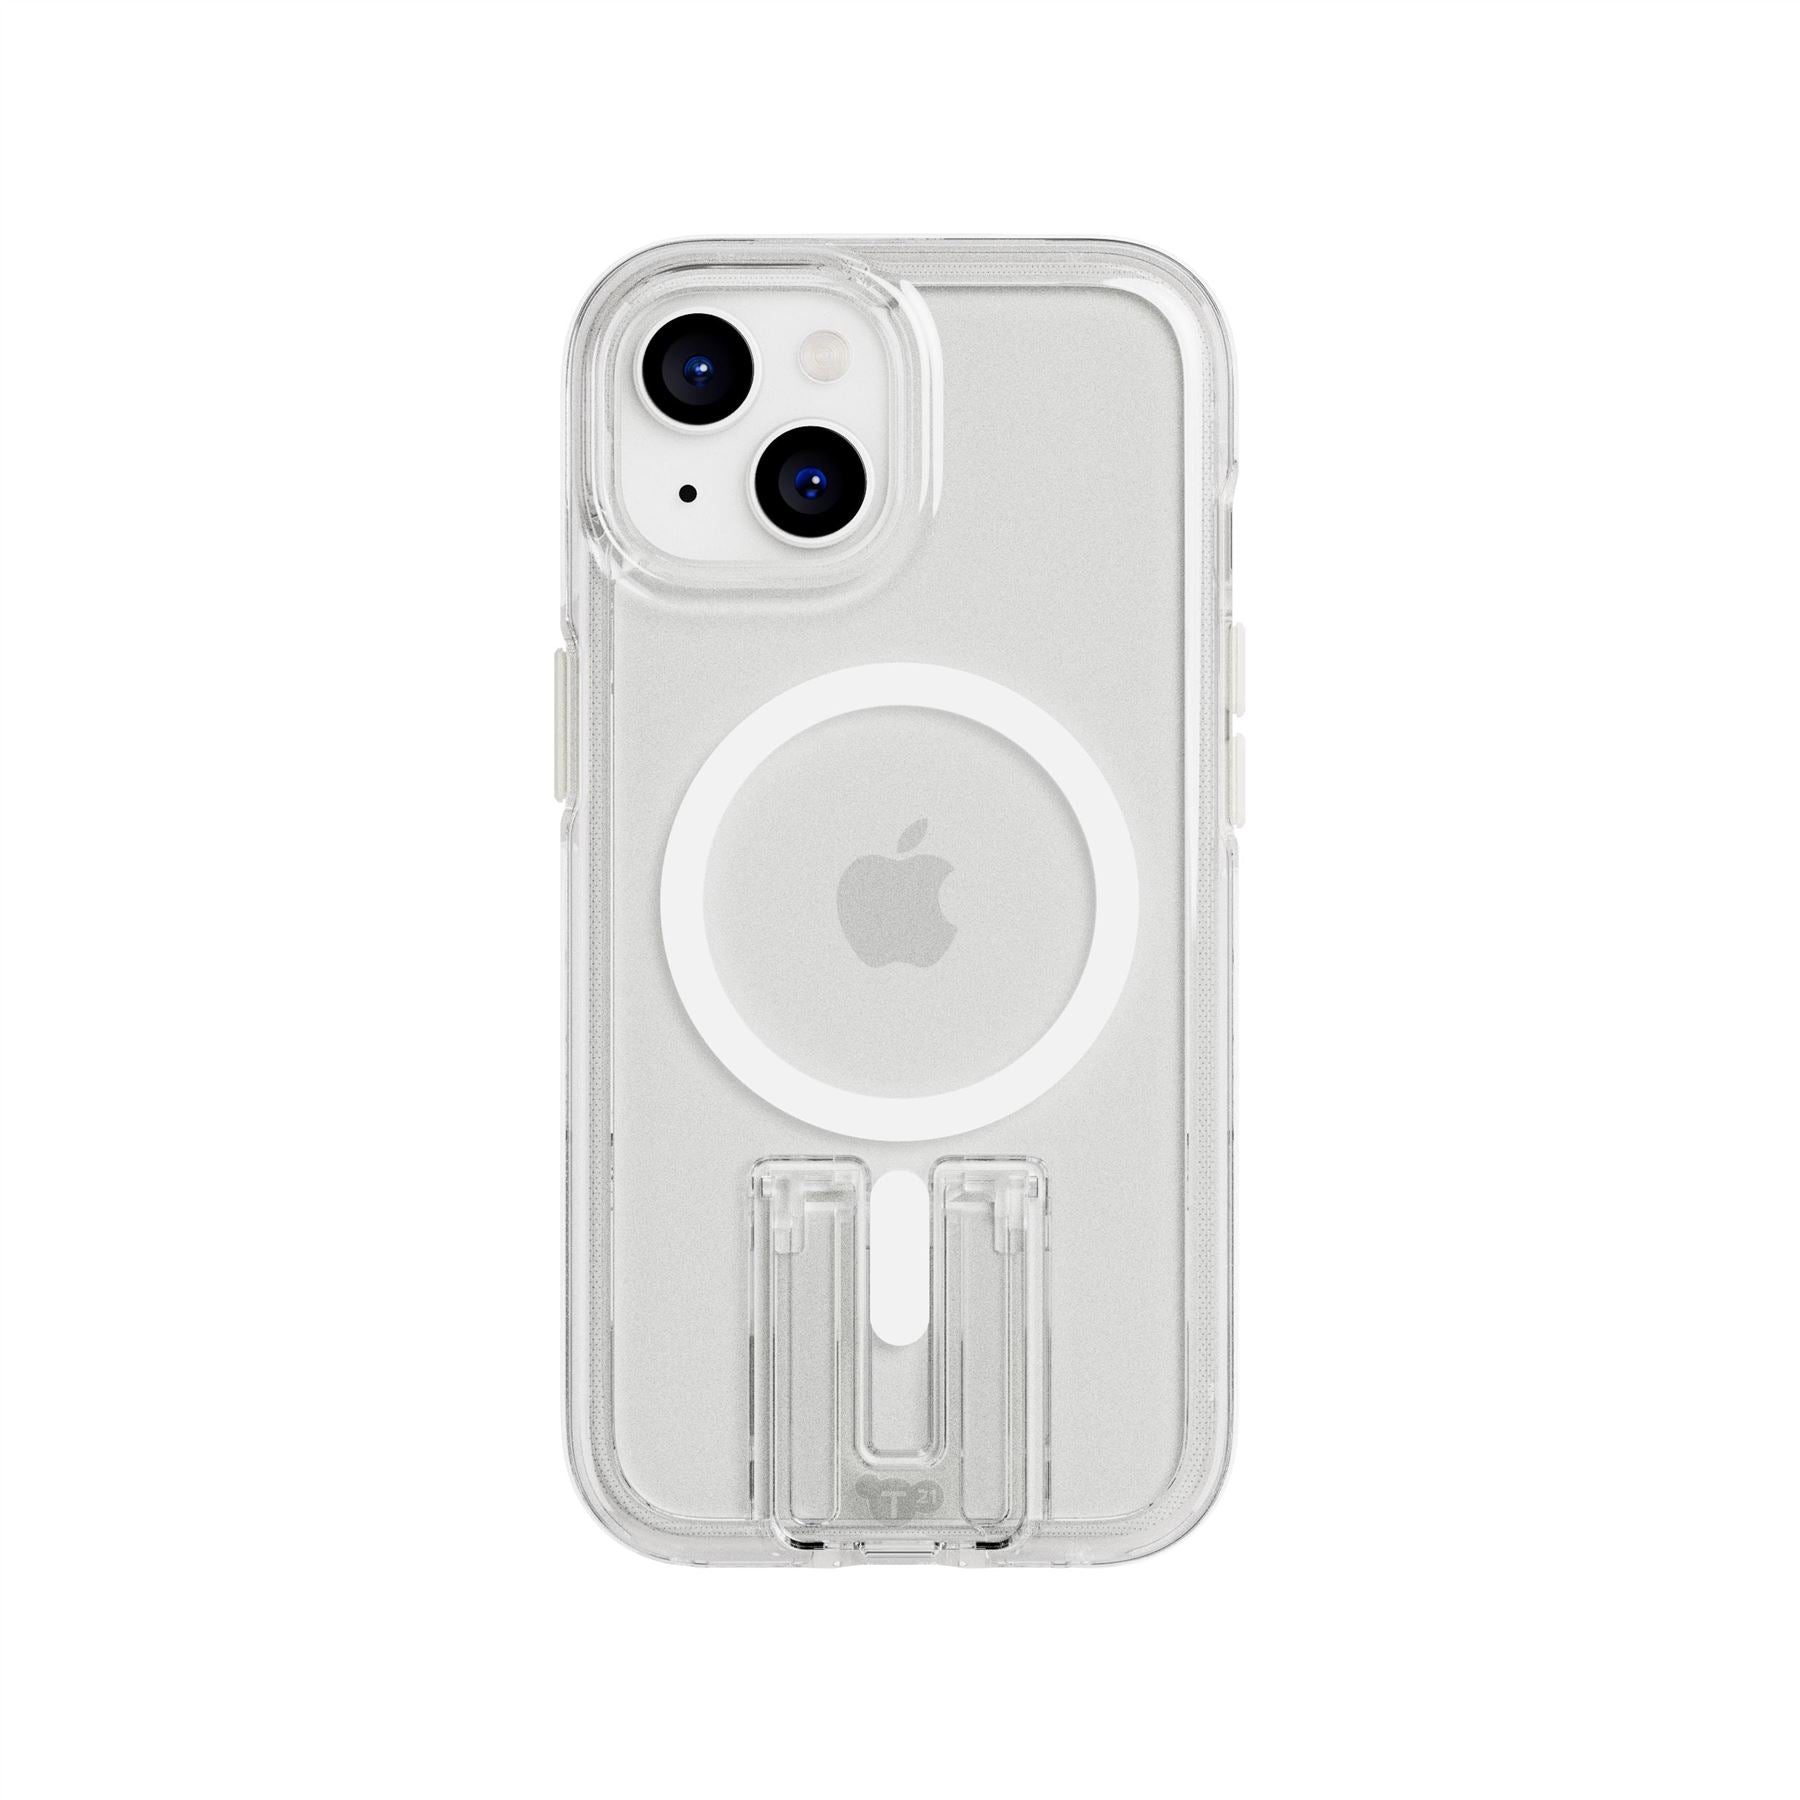 Evo Crystal Kick - Apple iPhone 15 Case MagSafe® Compatible - White